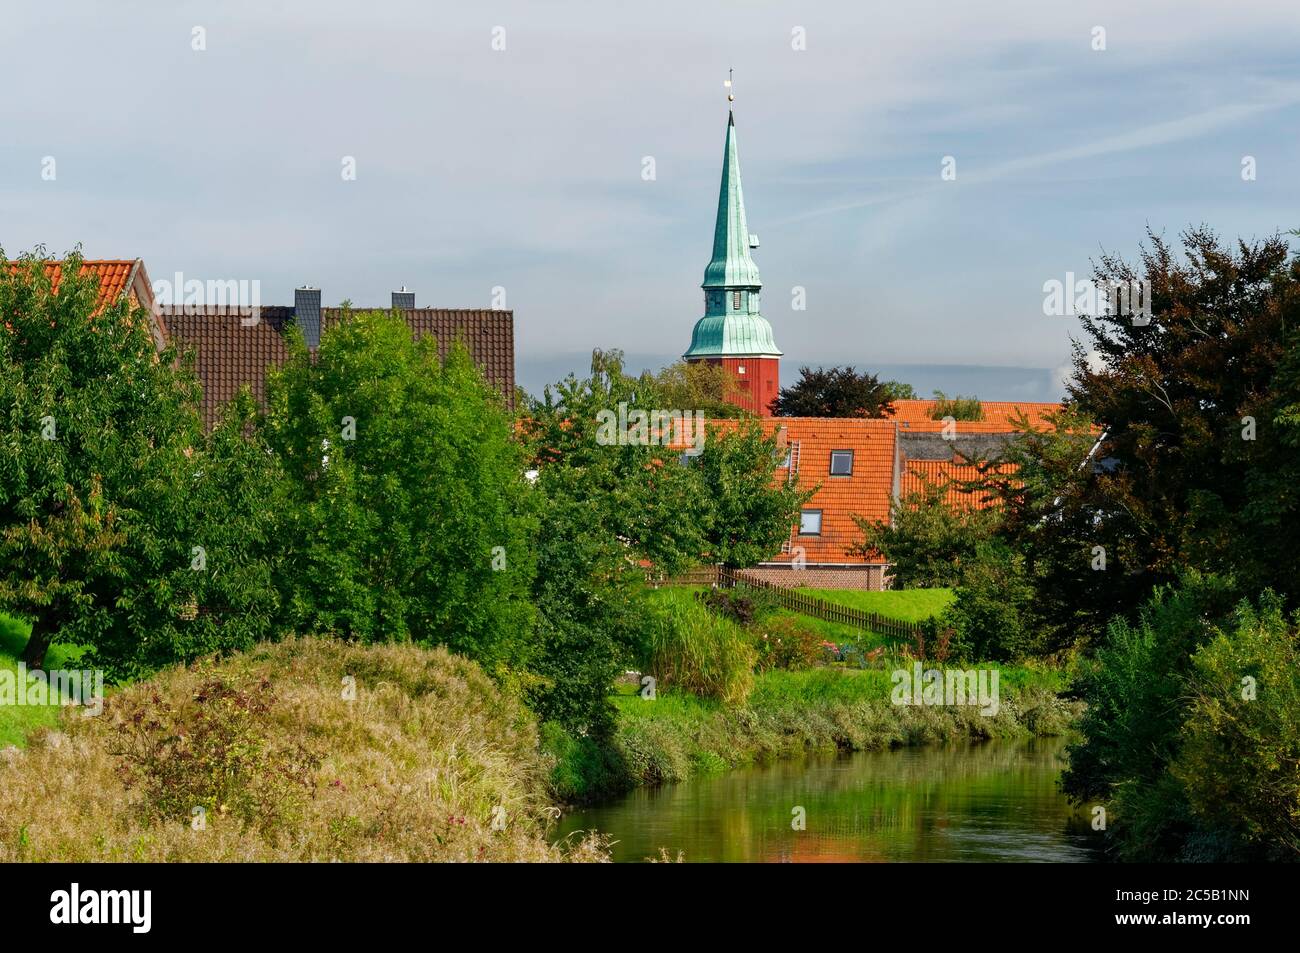 Steinkirchen in Altes Land: View with river Lühe and steeple of church St. Martini et Nicola, district of Stade, Lower Saxony, Germany Stock Photo